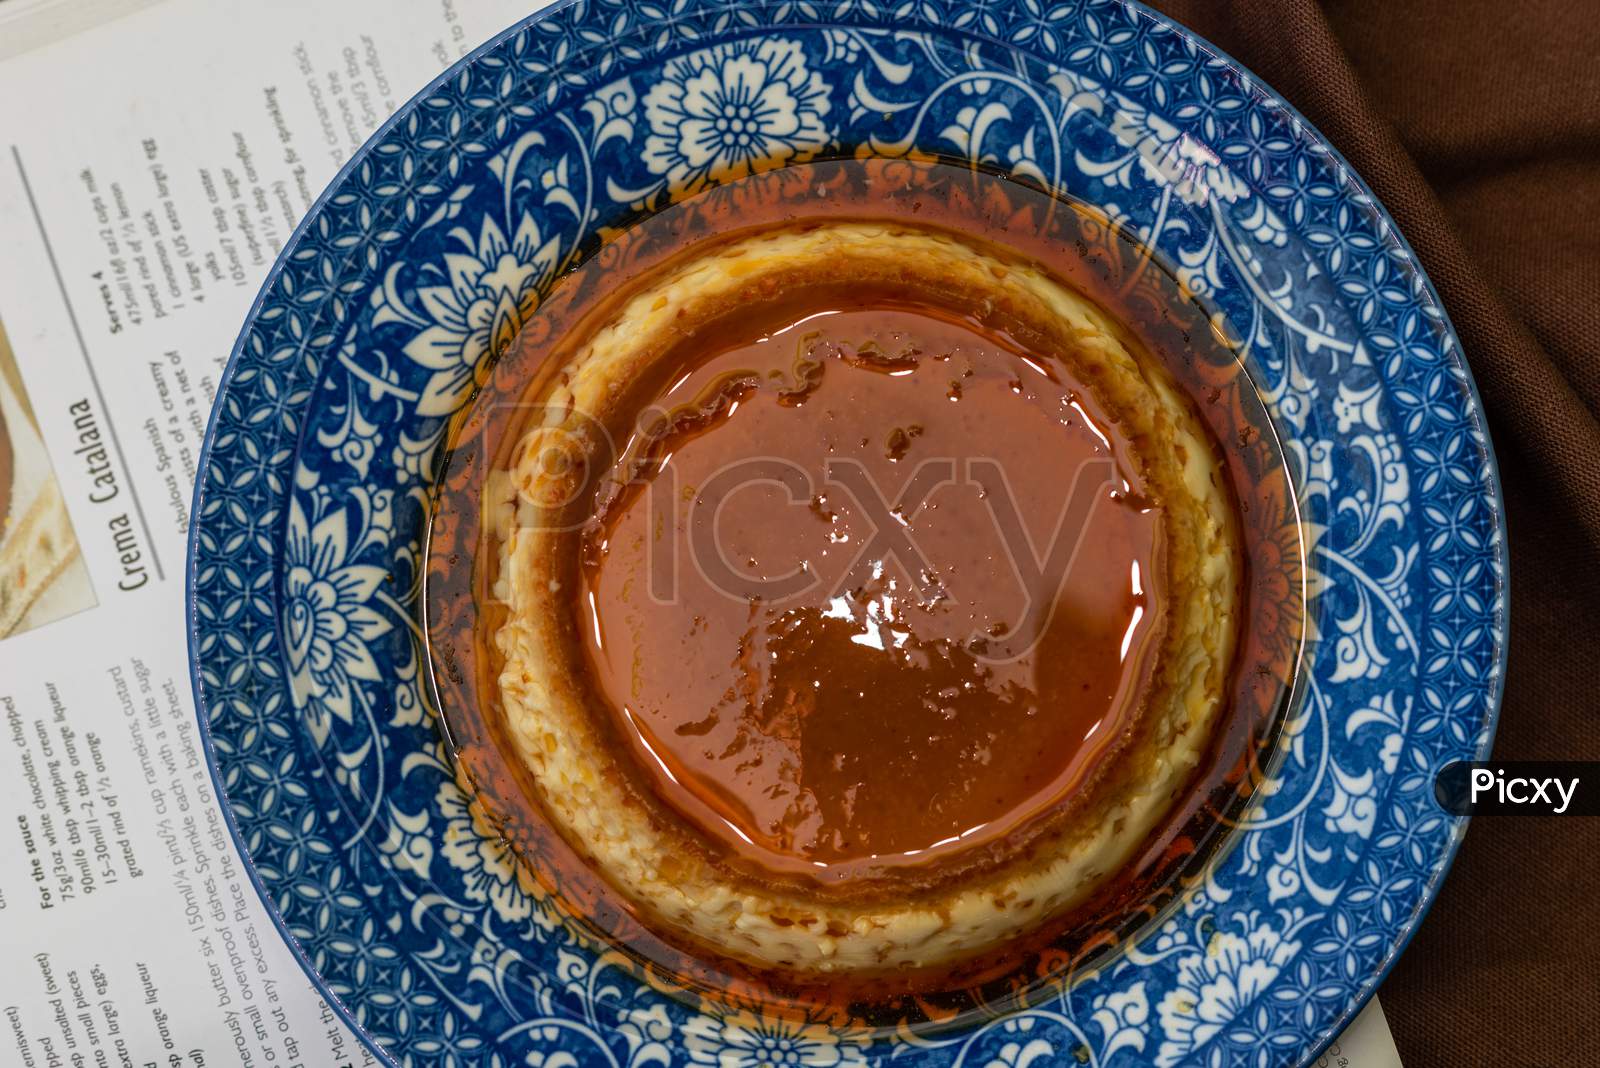 Image of Caramel custard/pudding on a china plate with nice background. Image for Restaurant menu and food magazines